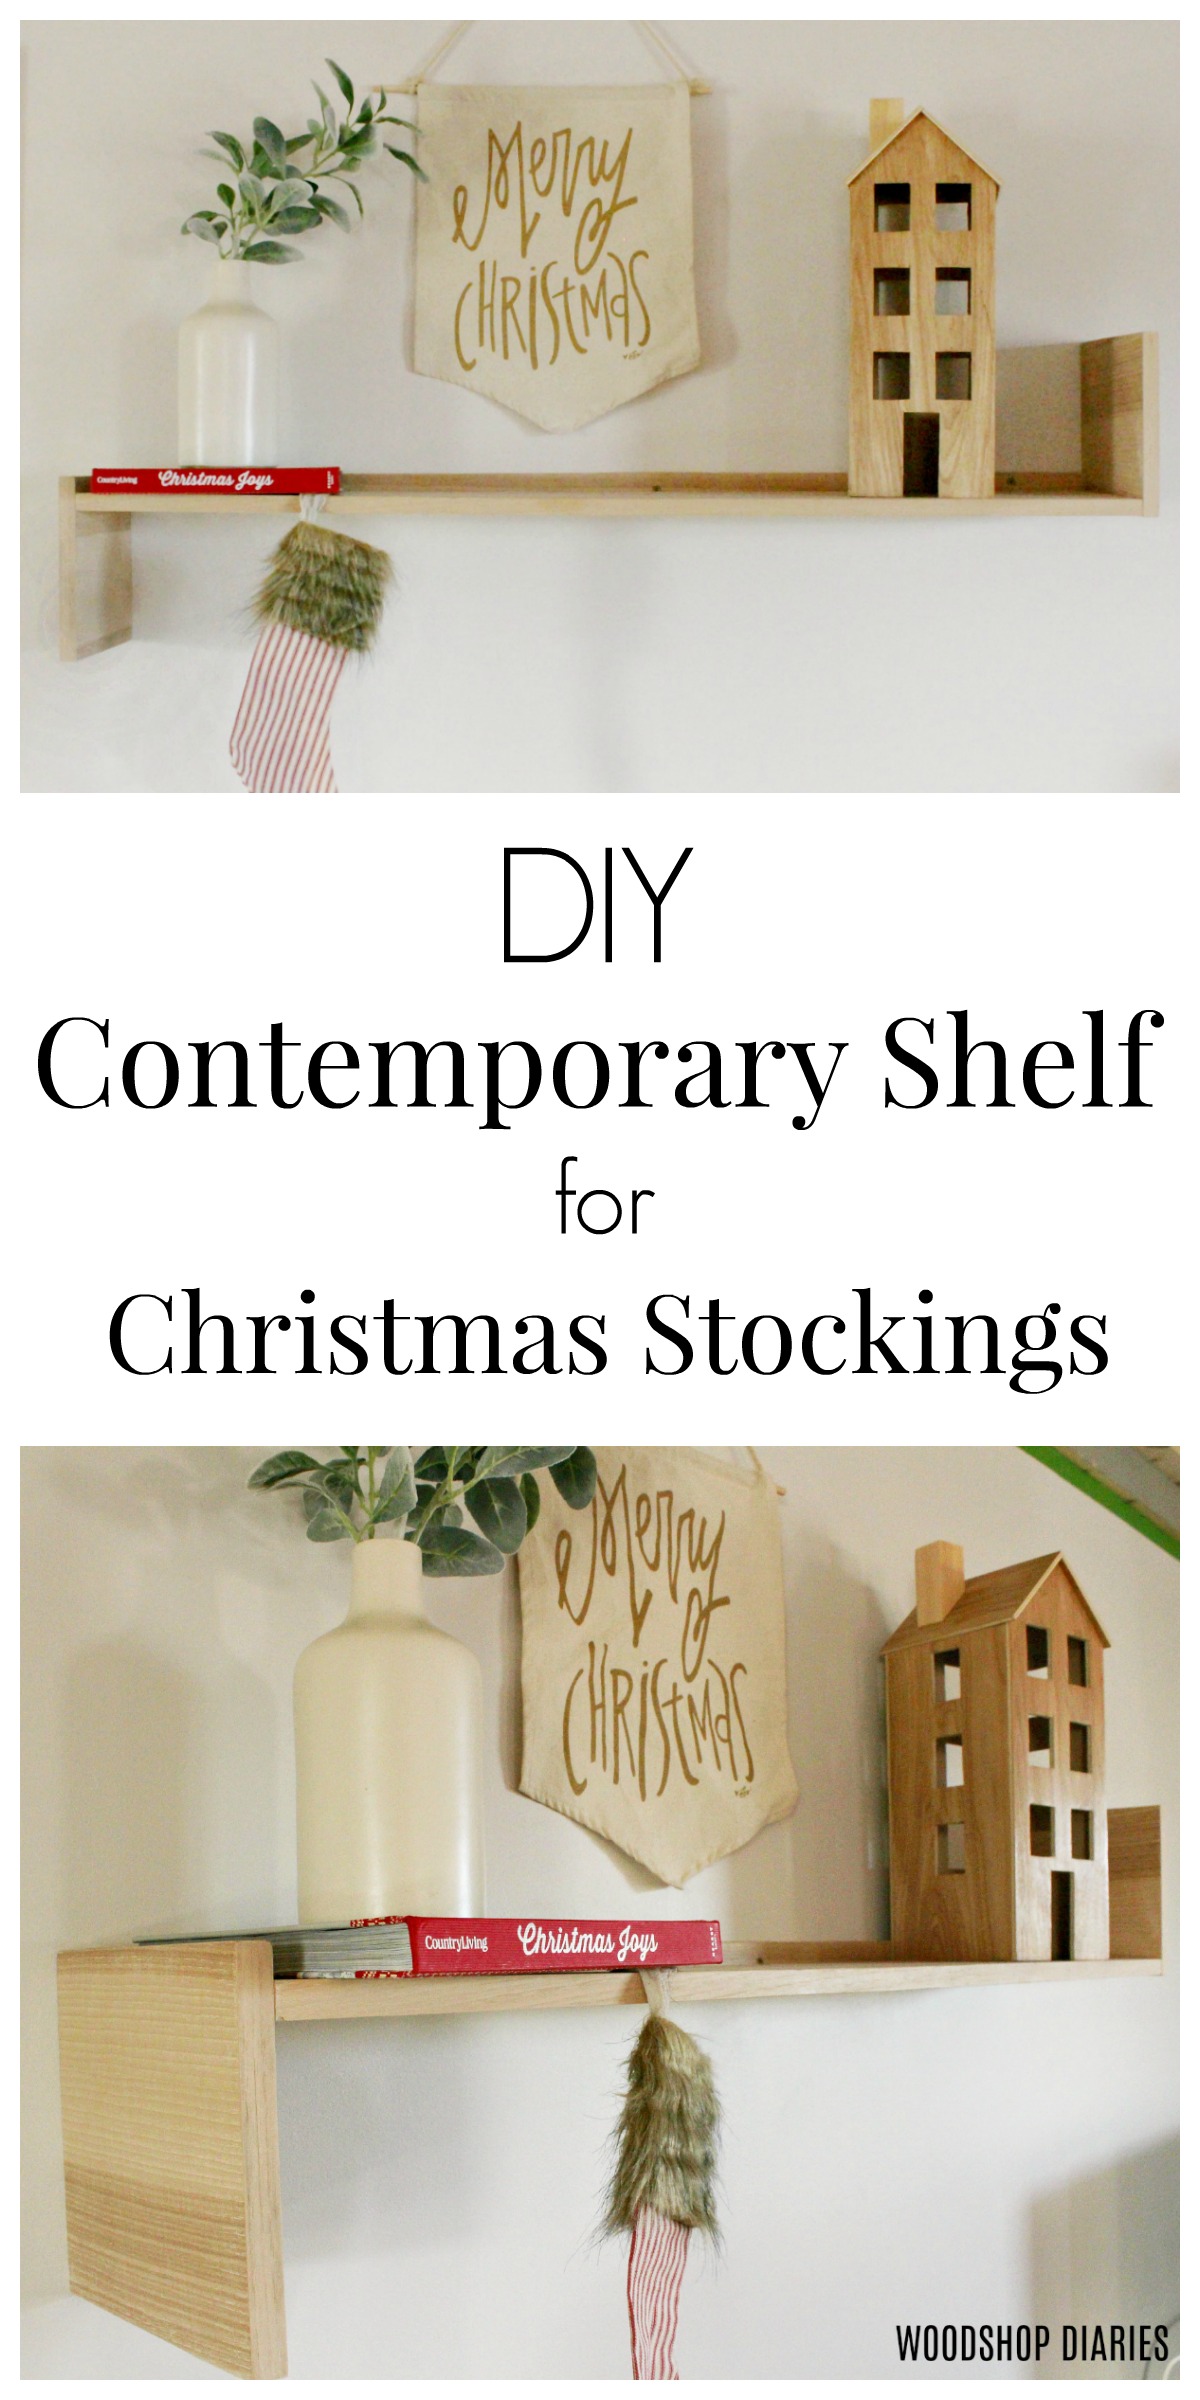 DIY Contemporary Shelf used as a Christmas Stocking Holder and place to display Christmas village